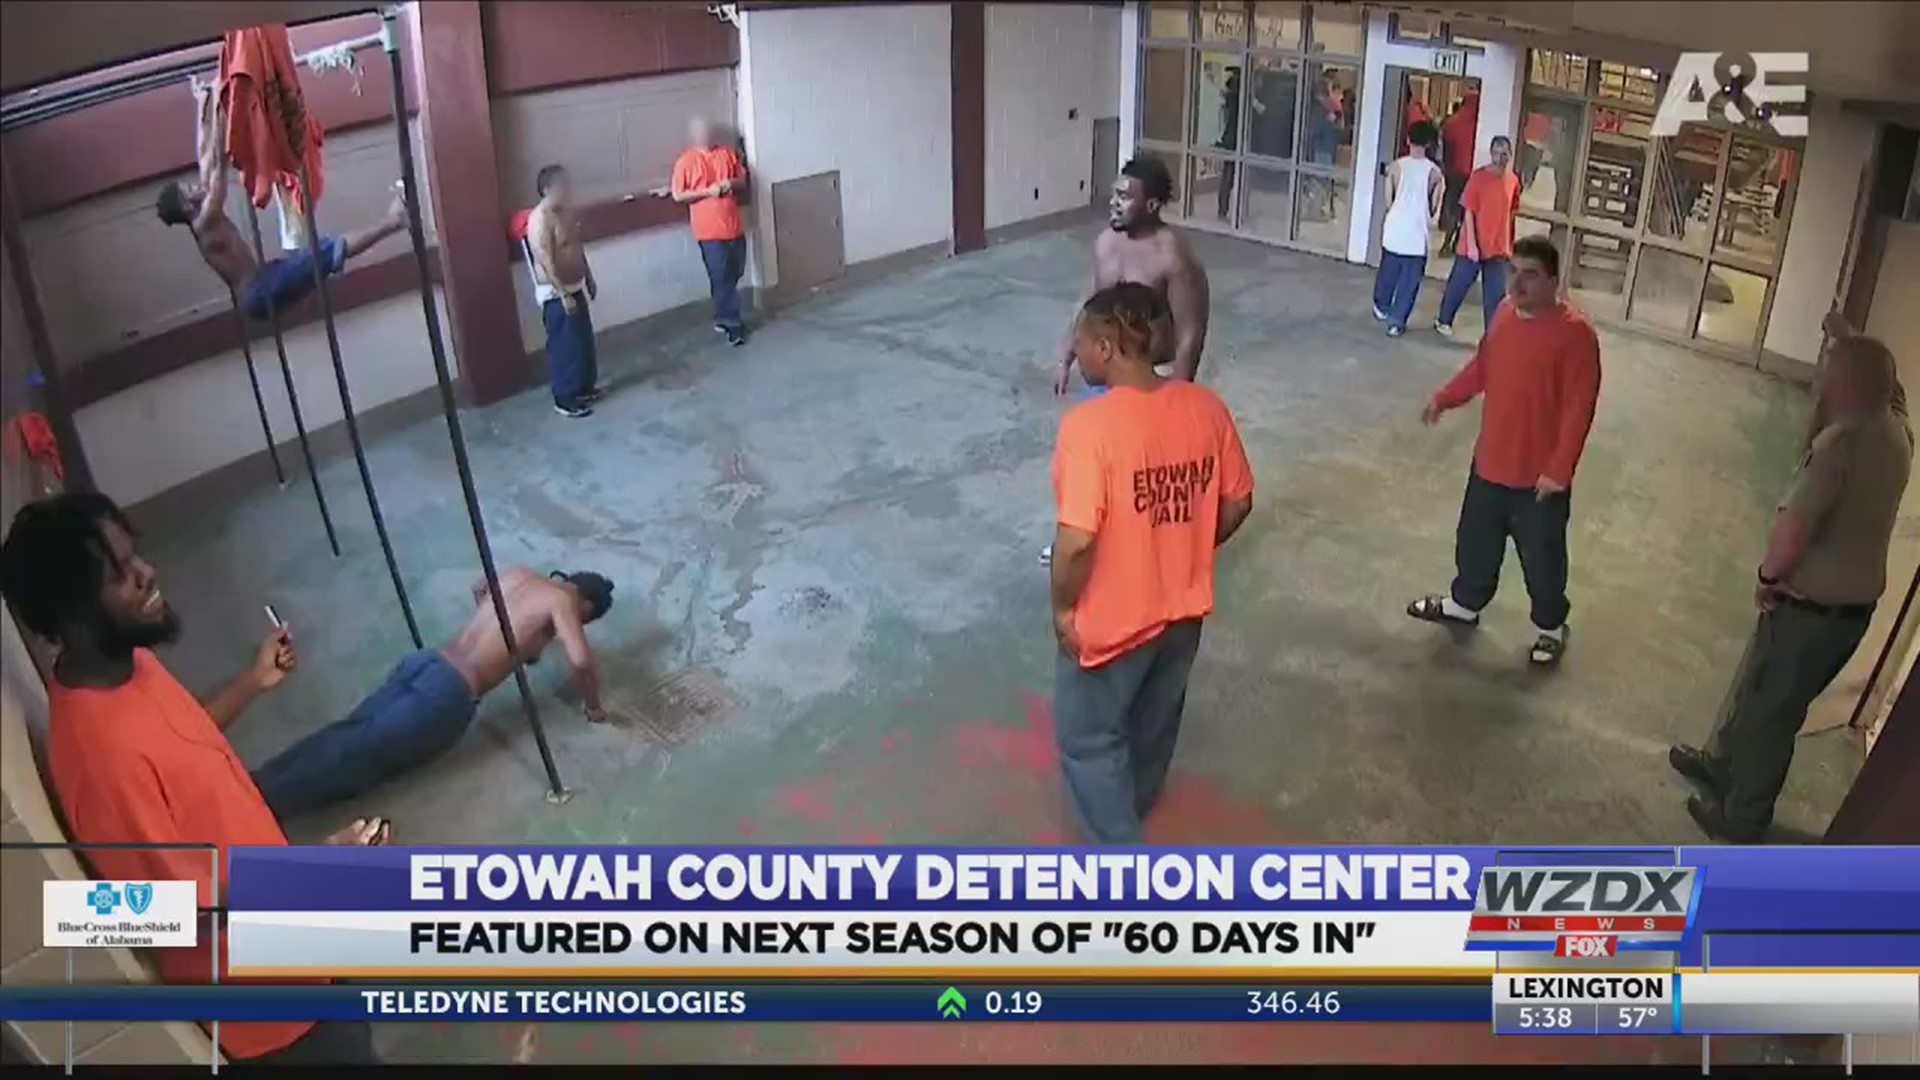 The Etowah County Detention Center will be getting National airtime after the New Year.